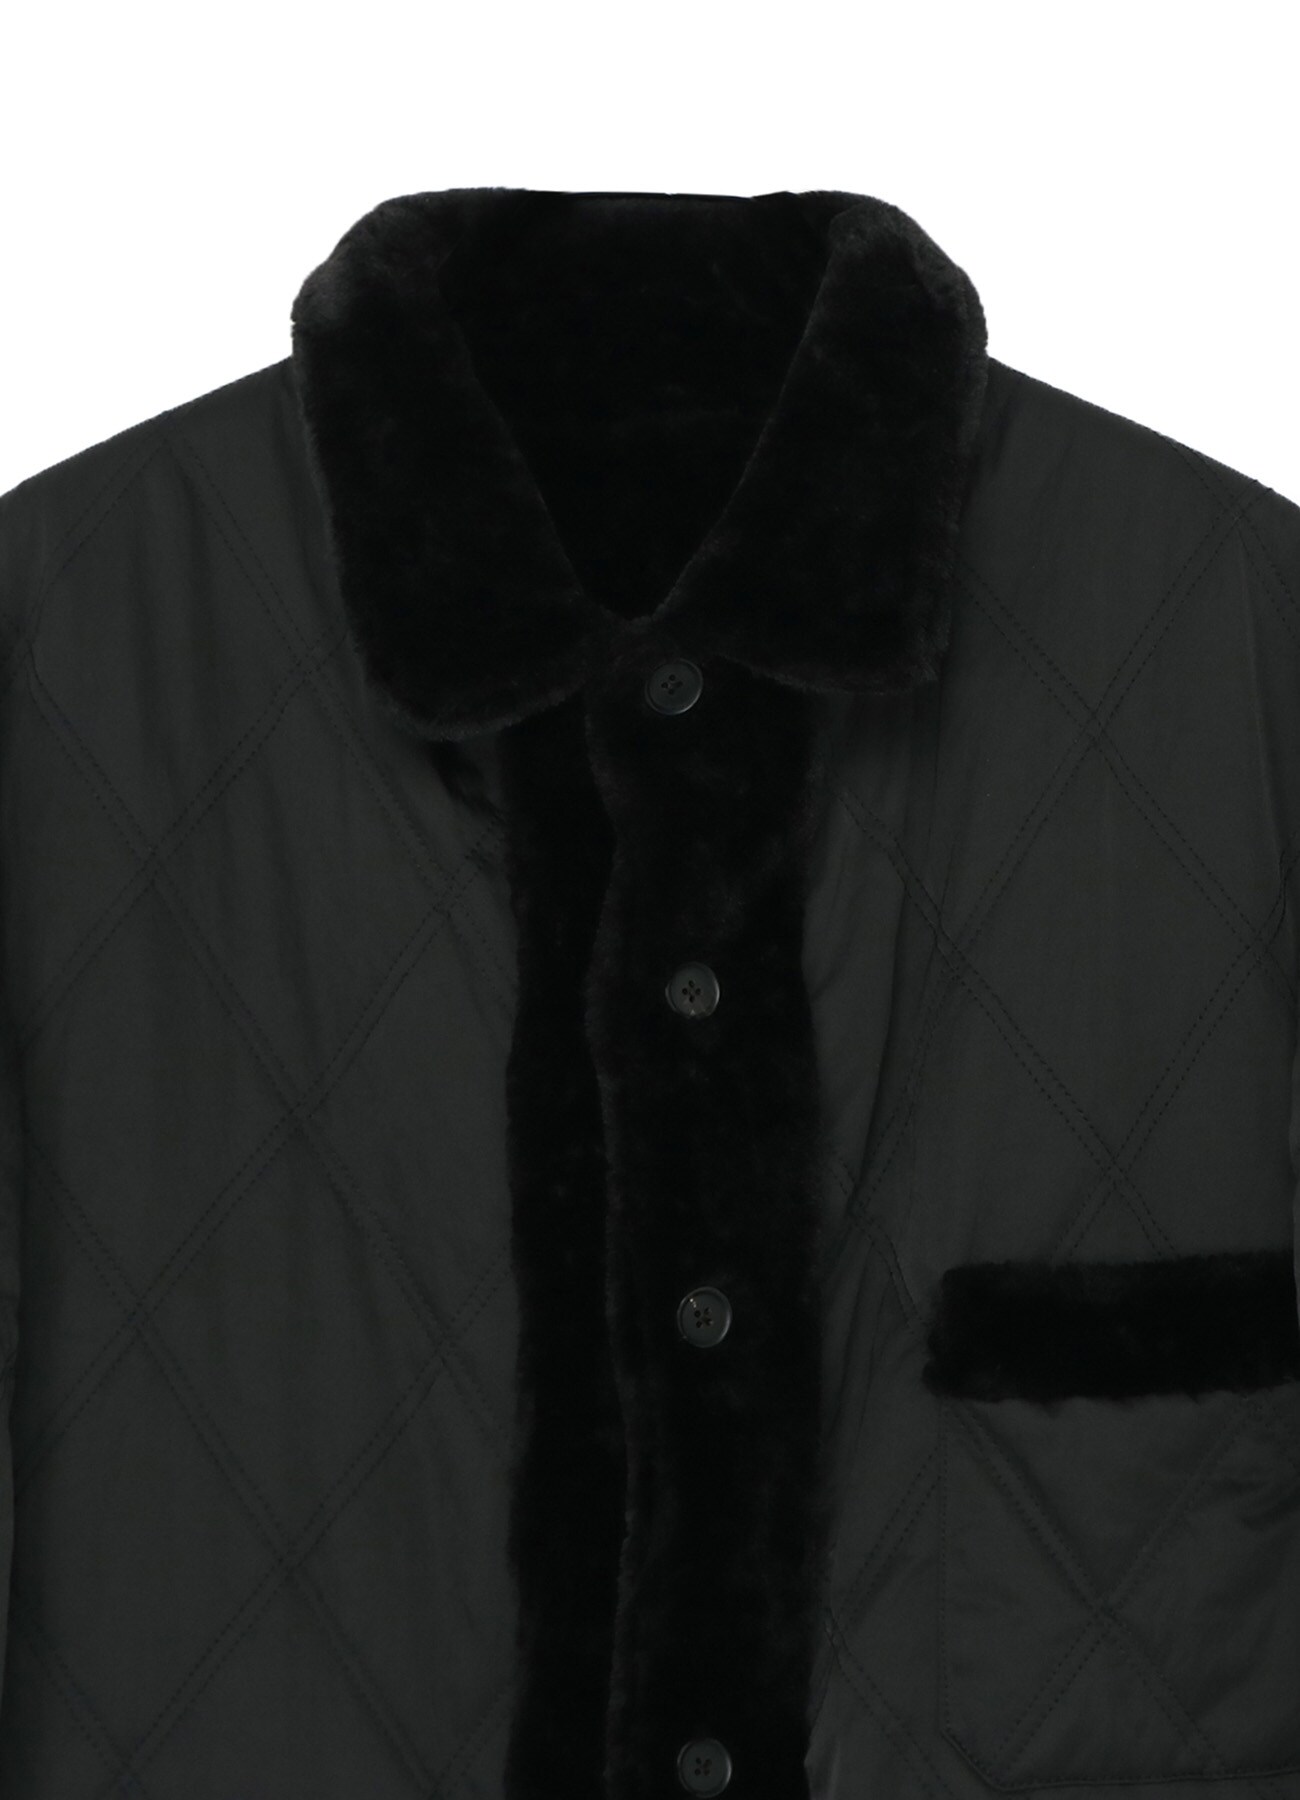 RICEMAN REVERSIBLE QUILTED JACKET BLACK/OLIVE Blouson outer